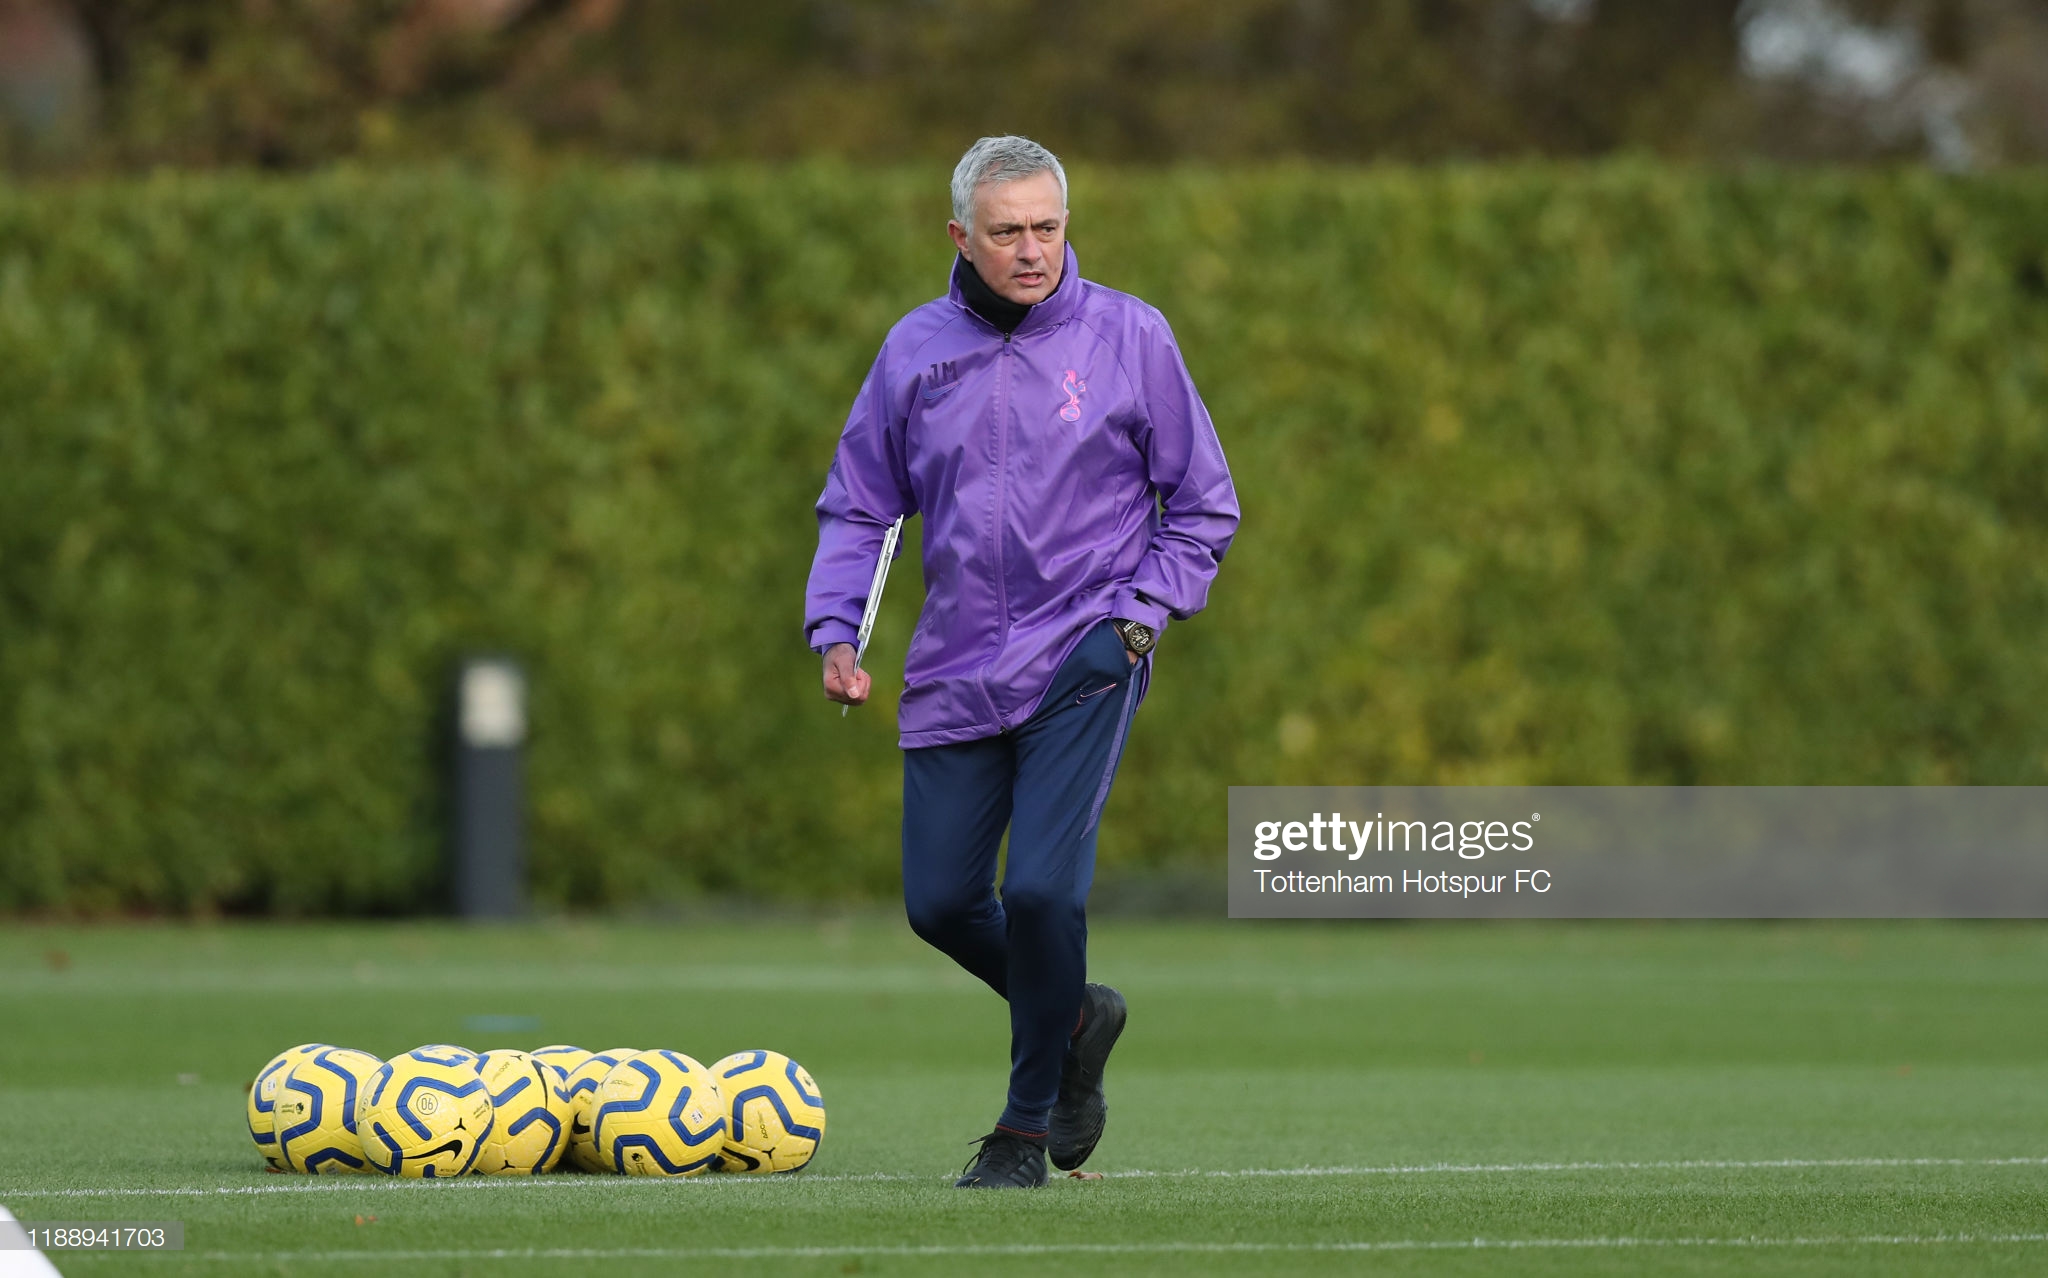 gettyimages-1188941703-2048x2048.jpg